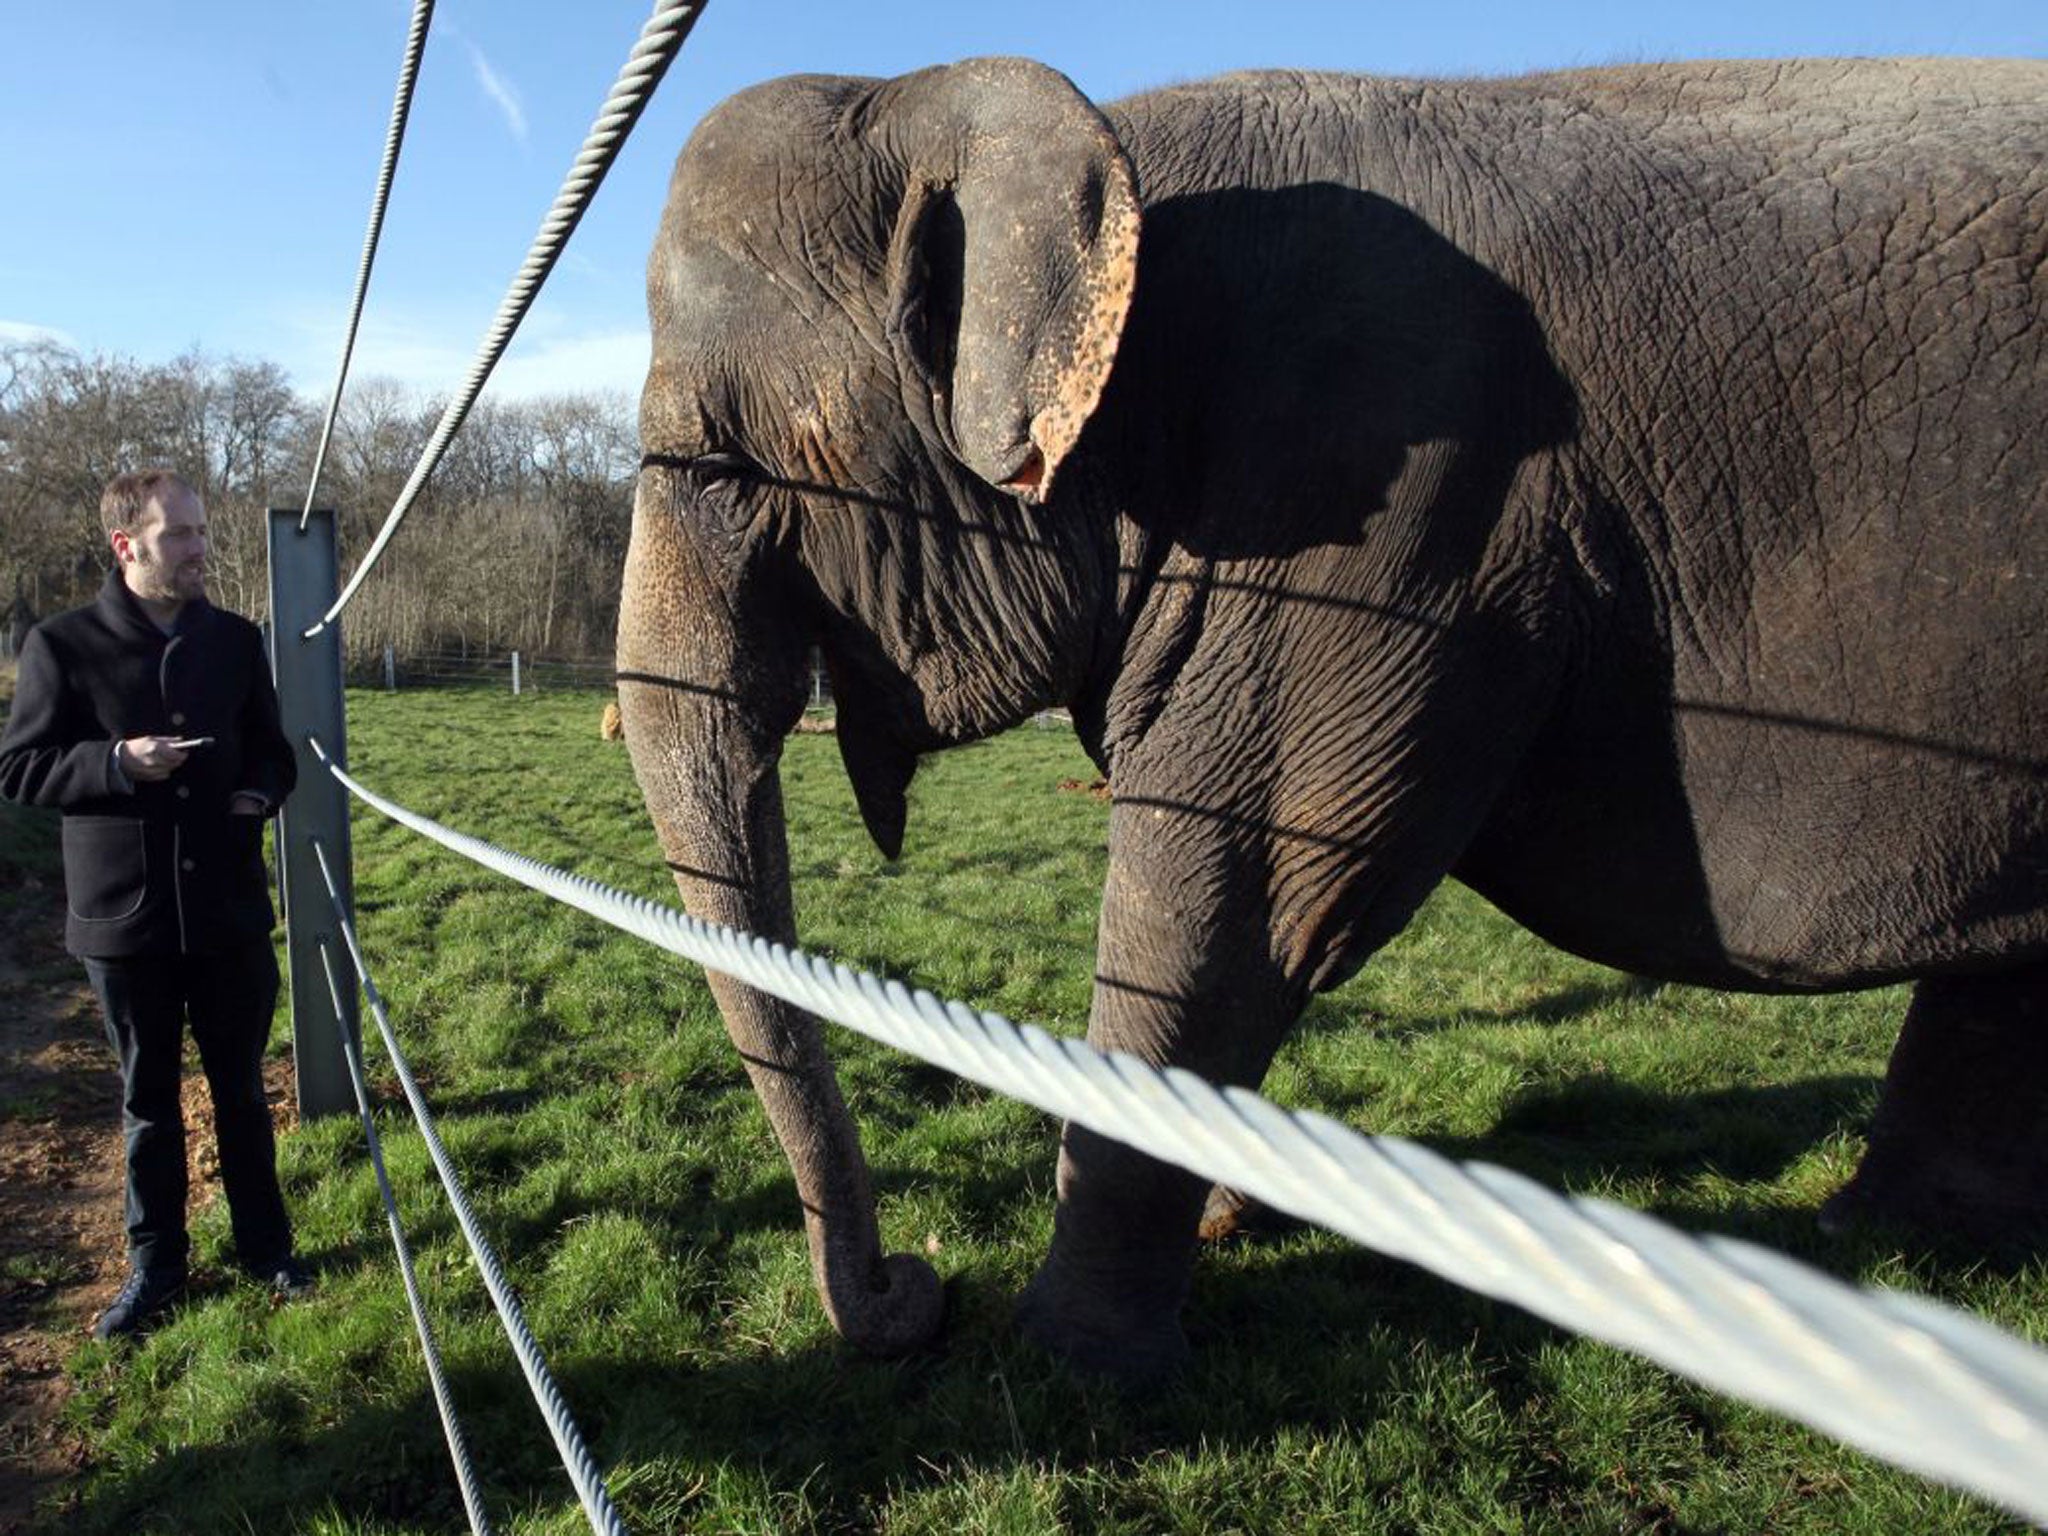 Simon Usborne gets to know Anne, Europe’s oldest elephant, who was secretly filmed being beaten at Bobby Roberts’ Super Circus